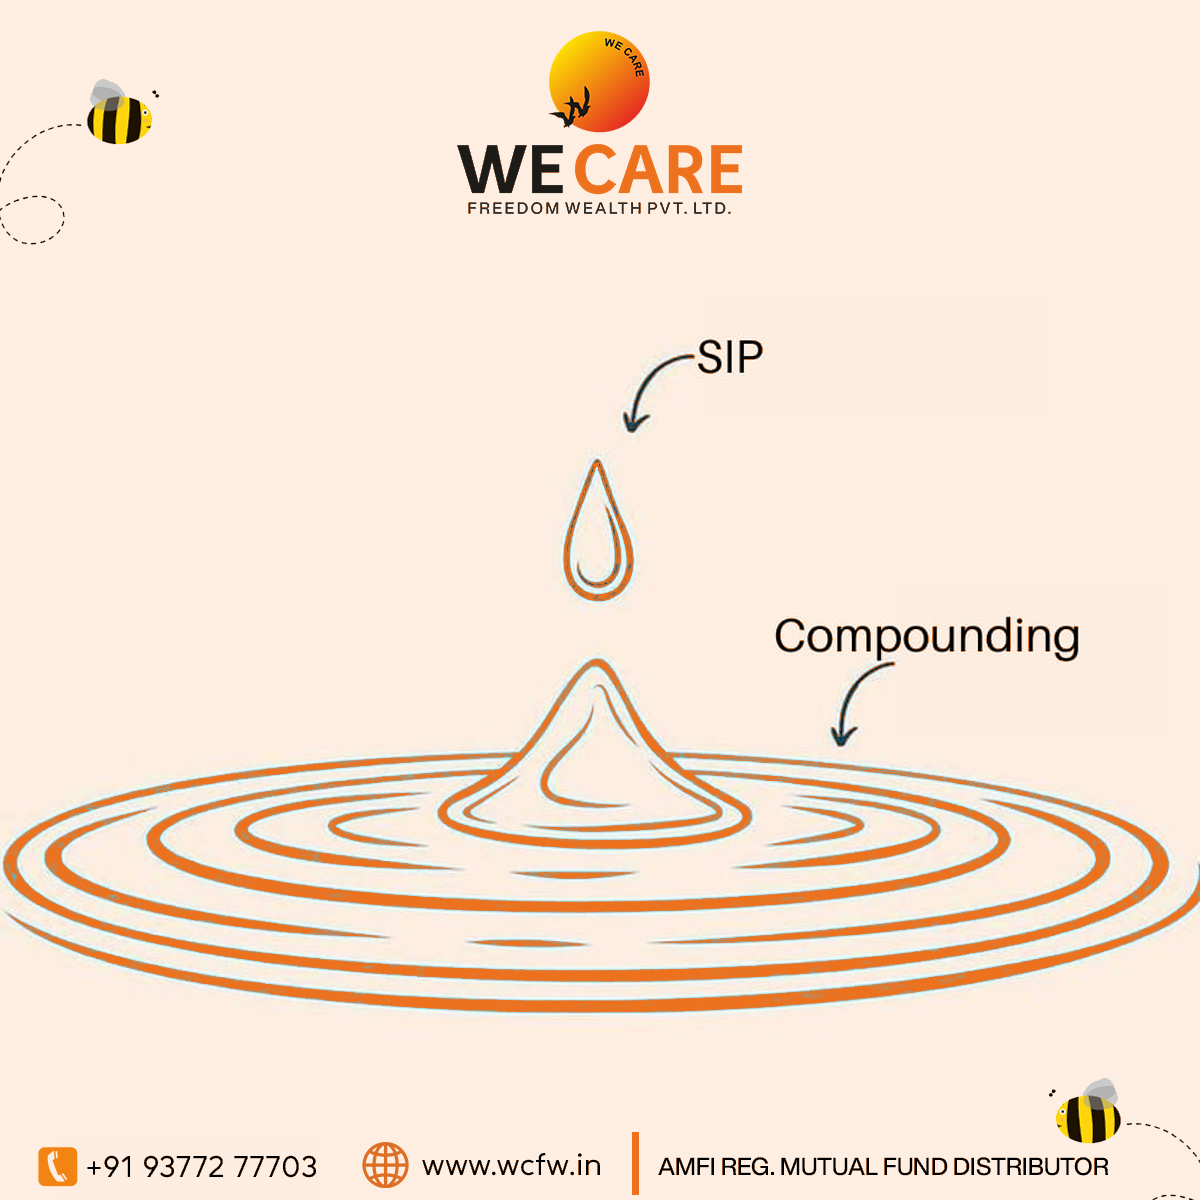 As an investment avenue, mutual funds are designed in a way to magnify the benefits of compounding. 

Invest in SIP and take advantages for compounding 

 #FinancialPlanning #mutualfundsahihai #SmartInvesting #teamwecare #teamwcfw #wcfw #wecarefreedomwealth